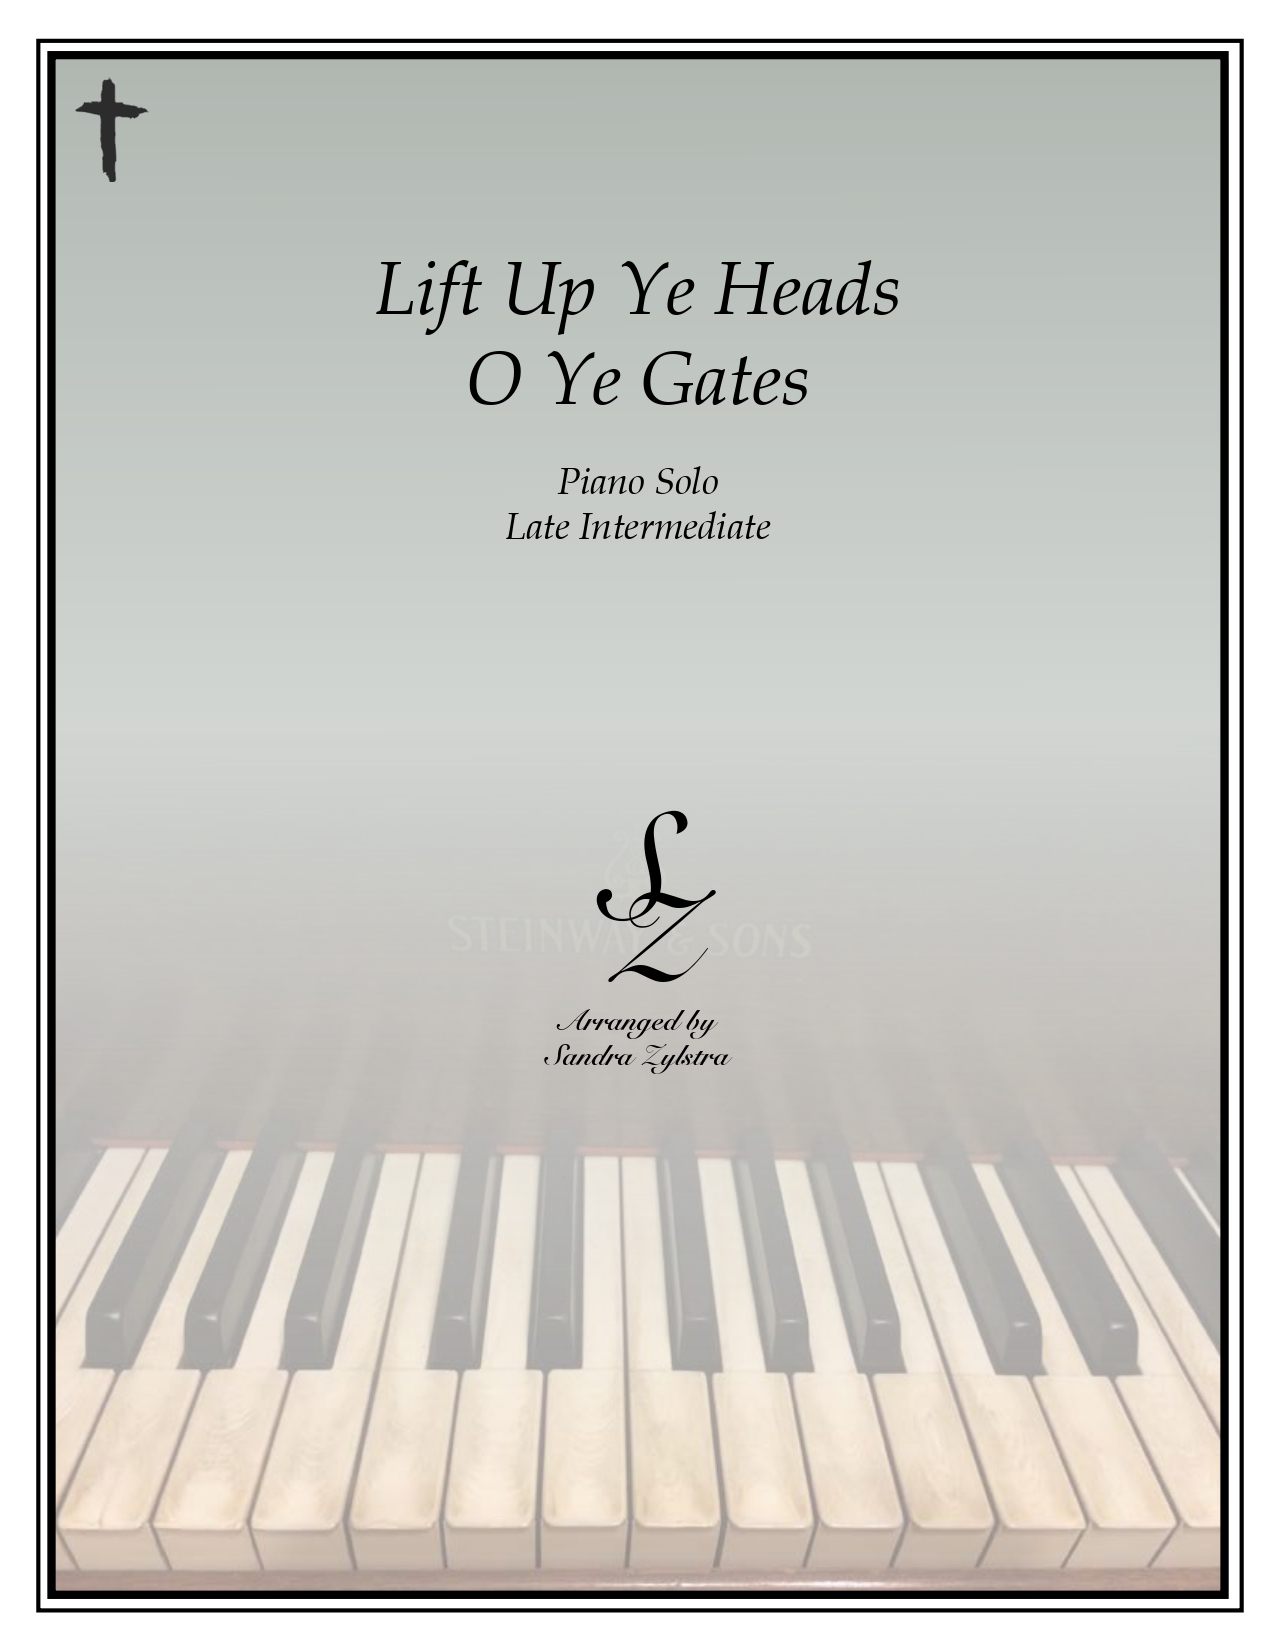 Lift Up Ye Heads late intermediate piano cover page 00011